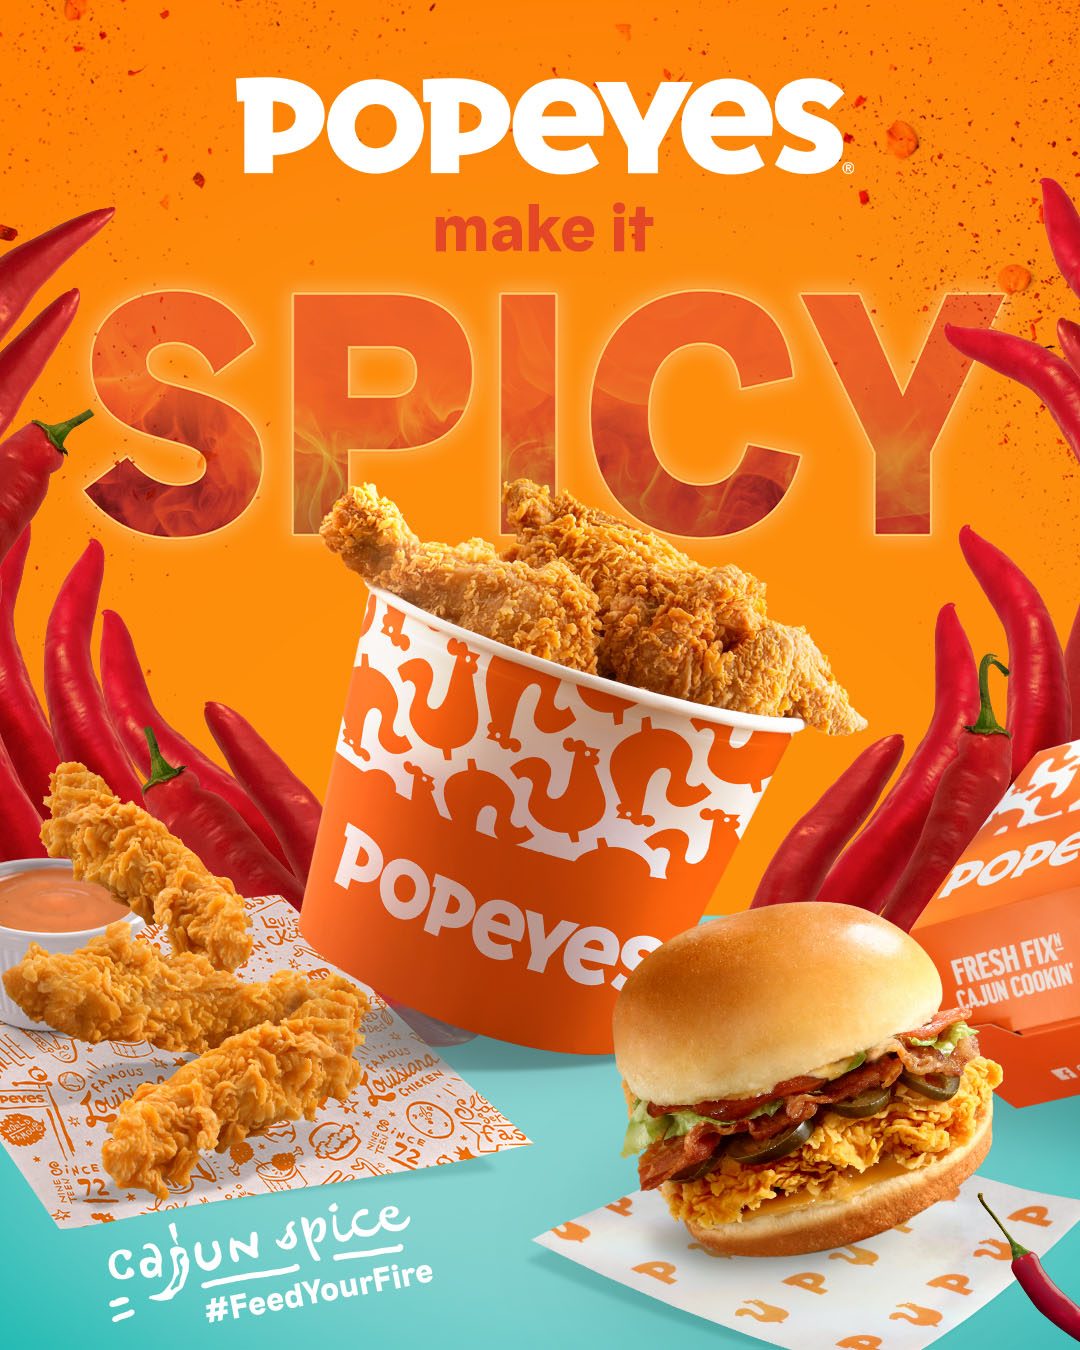 Popeyes brings spicy fried chicken to Metro Manila